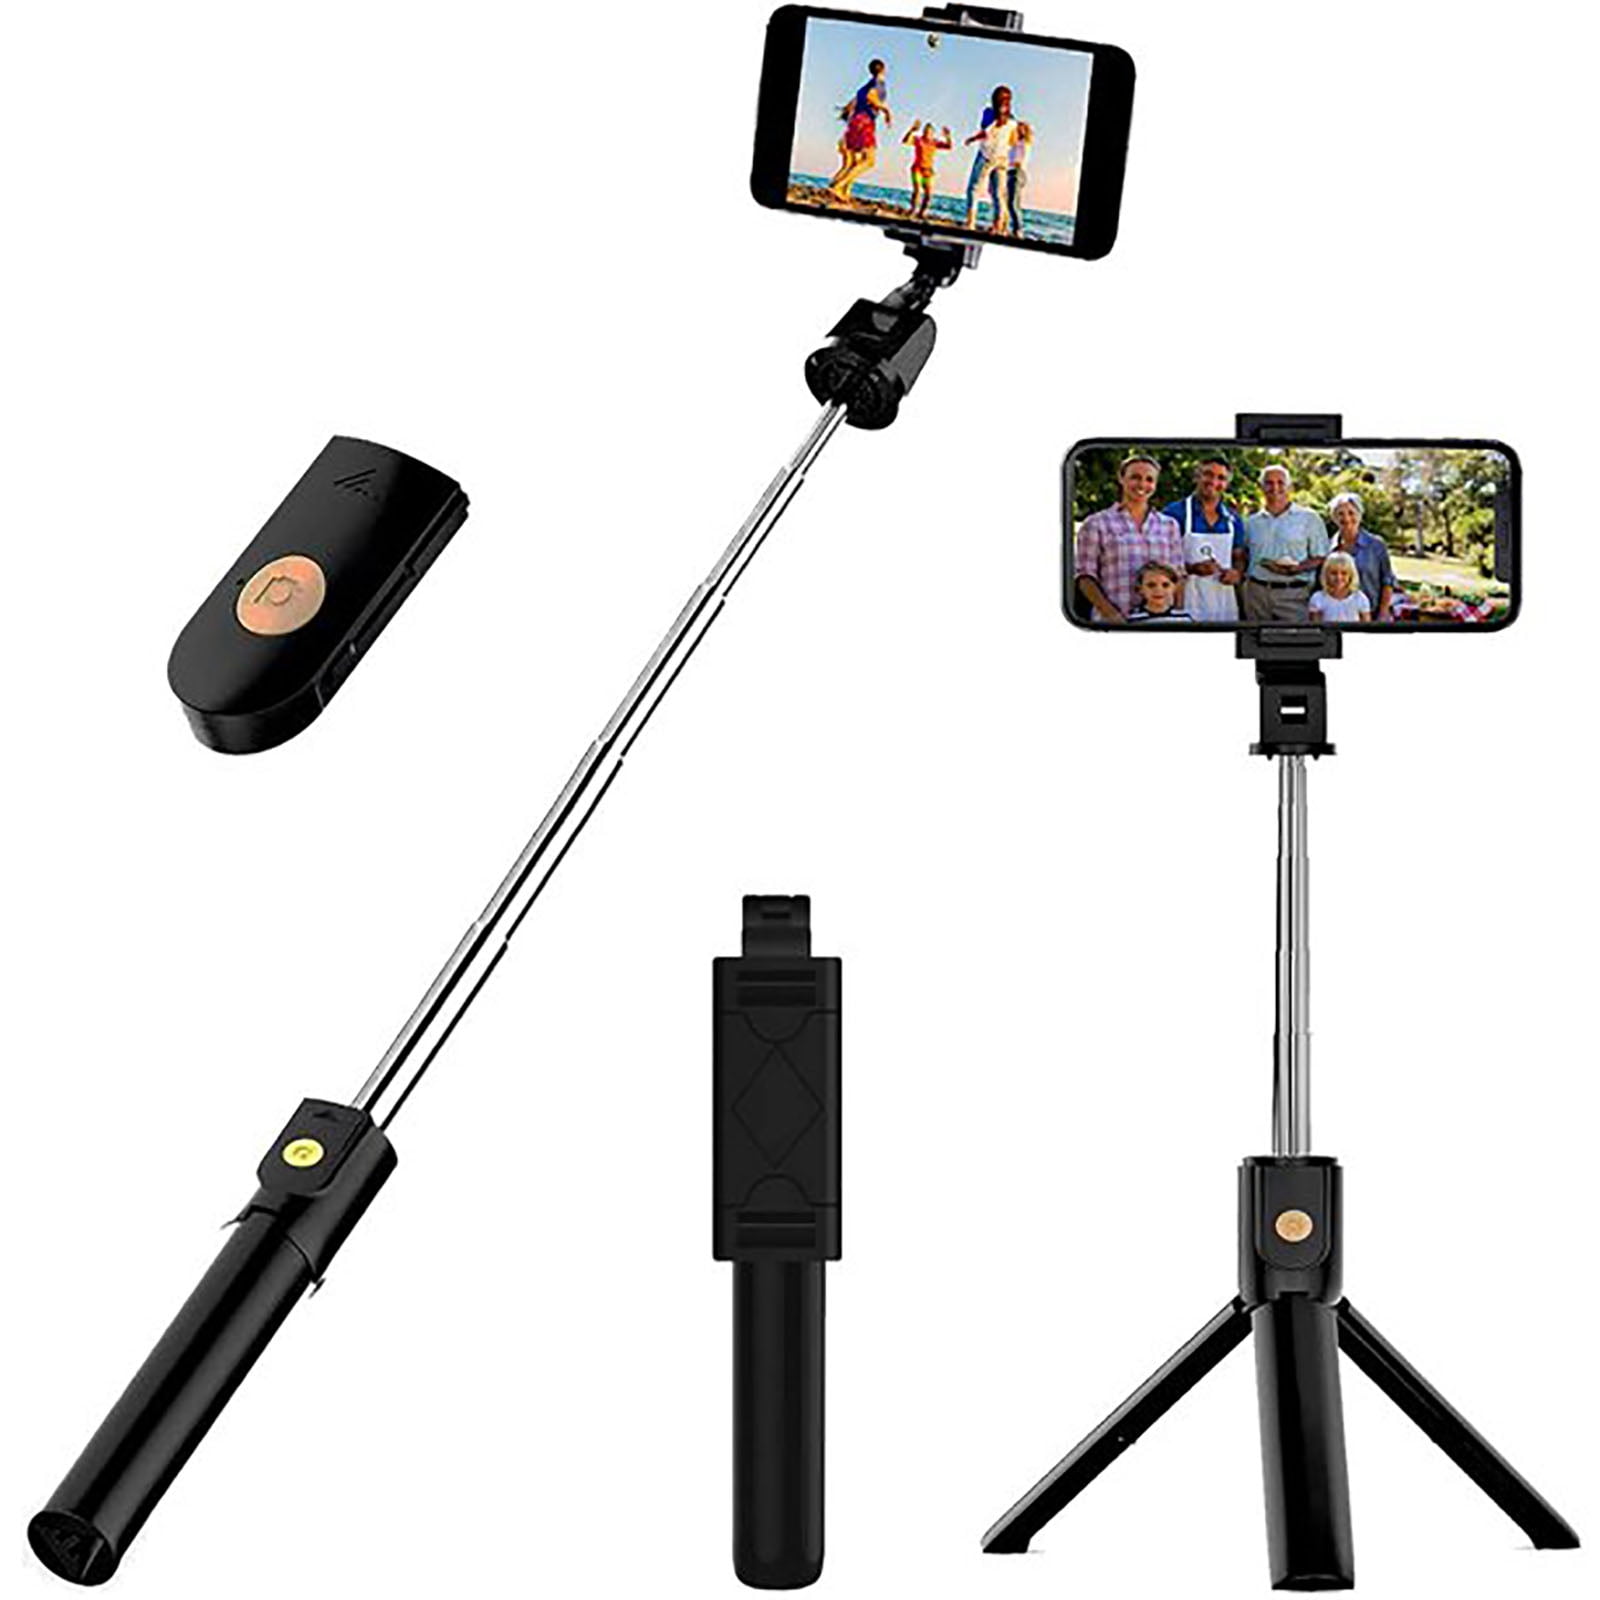 3 in 1 Extendable Selfie Tripod with Detachable Bluetooth Wireless Remote Holder Compatible with and Android Smartphone - Walmart.com